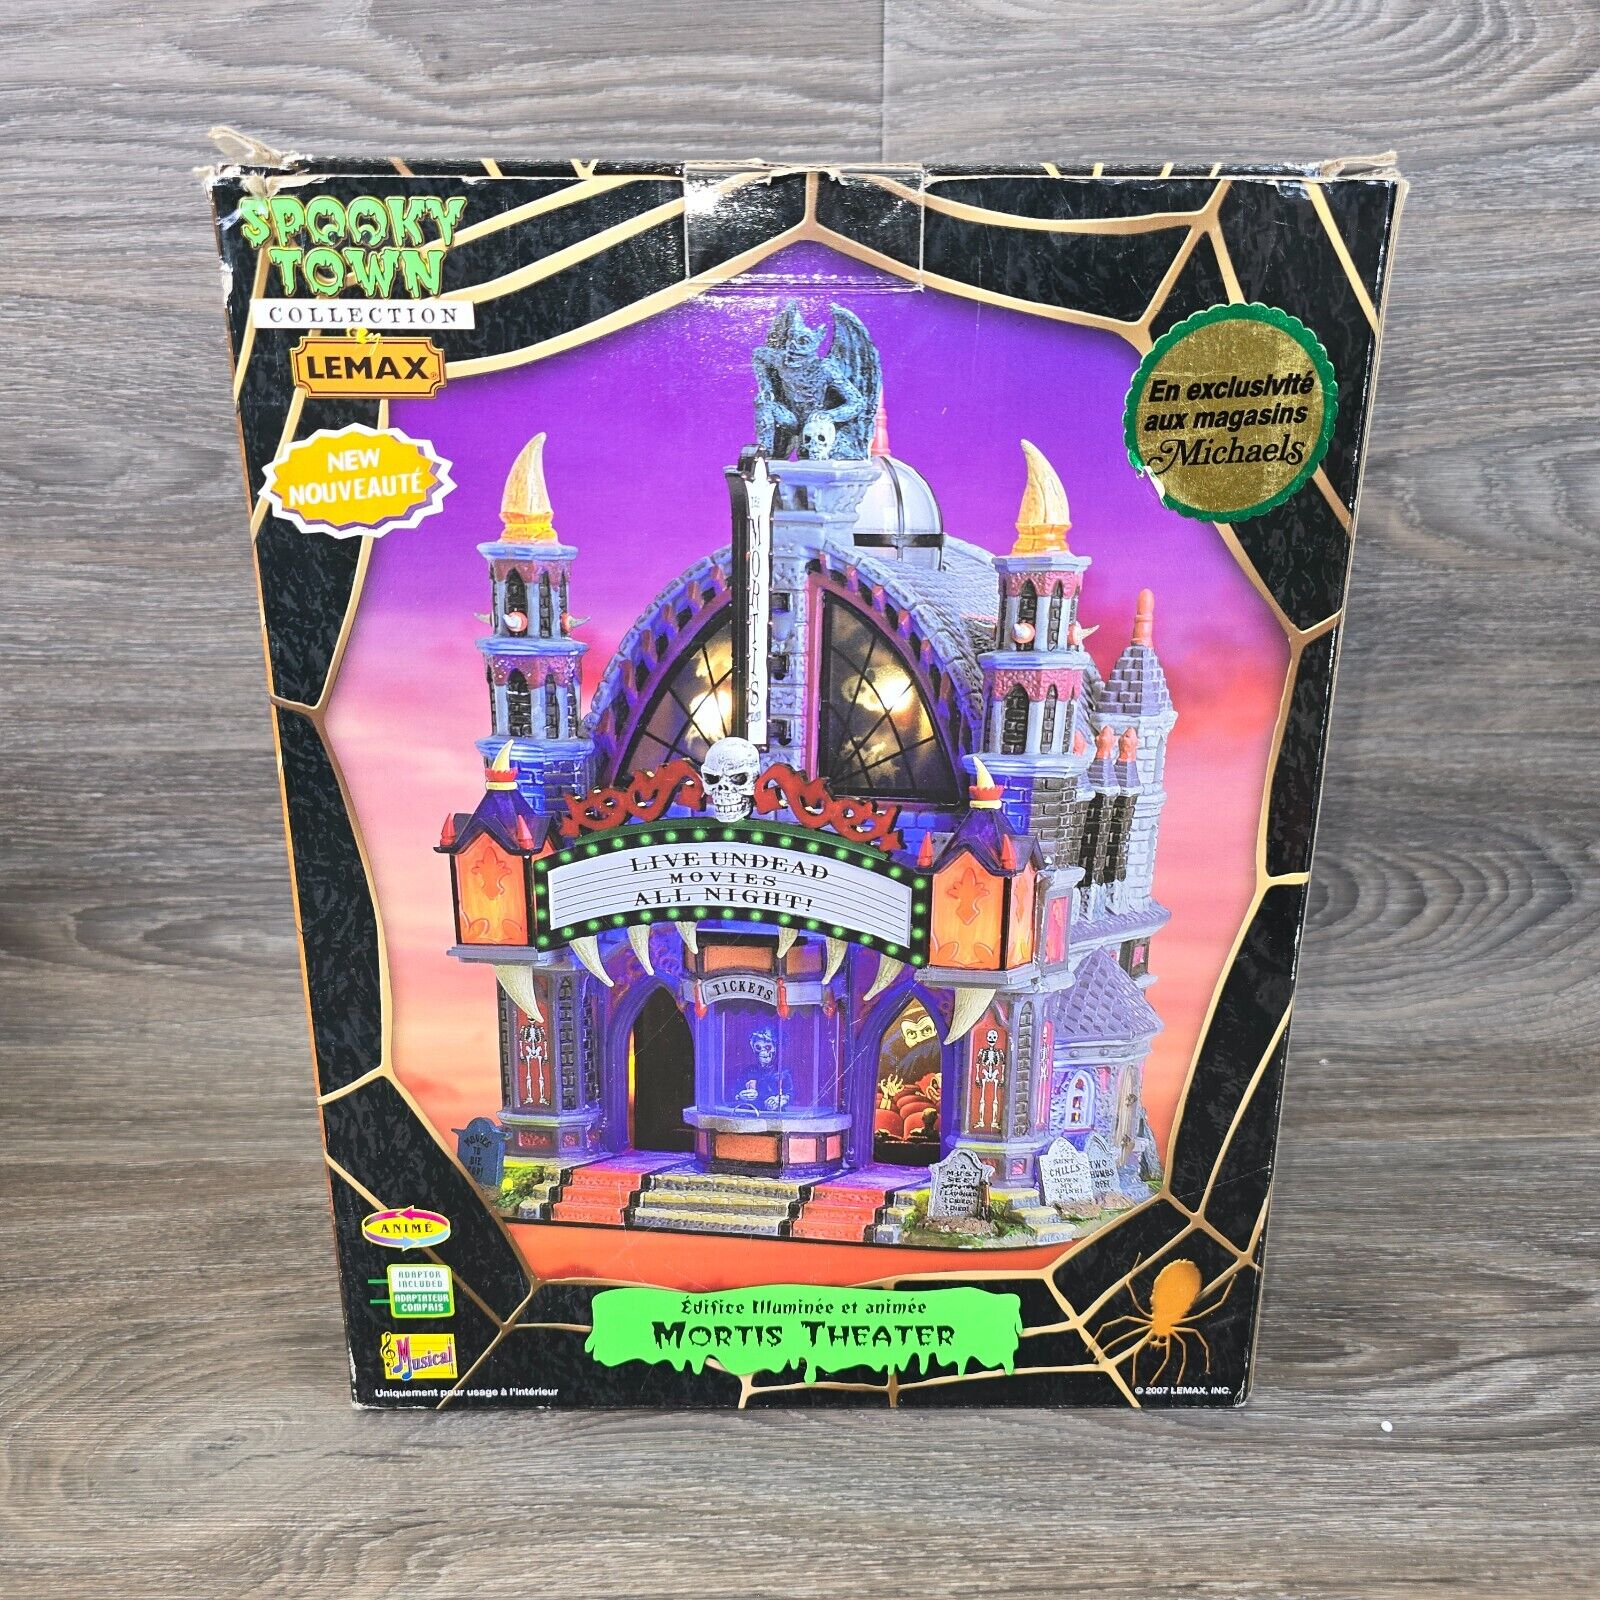 Lemax Spooky Town Mortis Theater, Movie Theater In Box Styrofoam WORKS GREAT